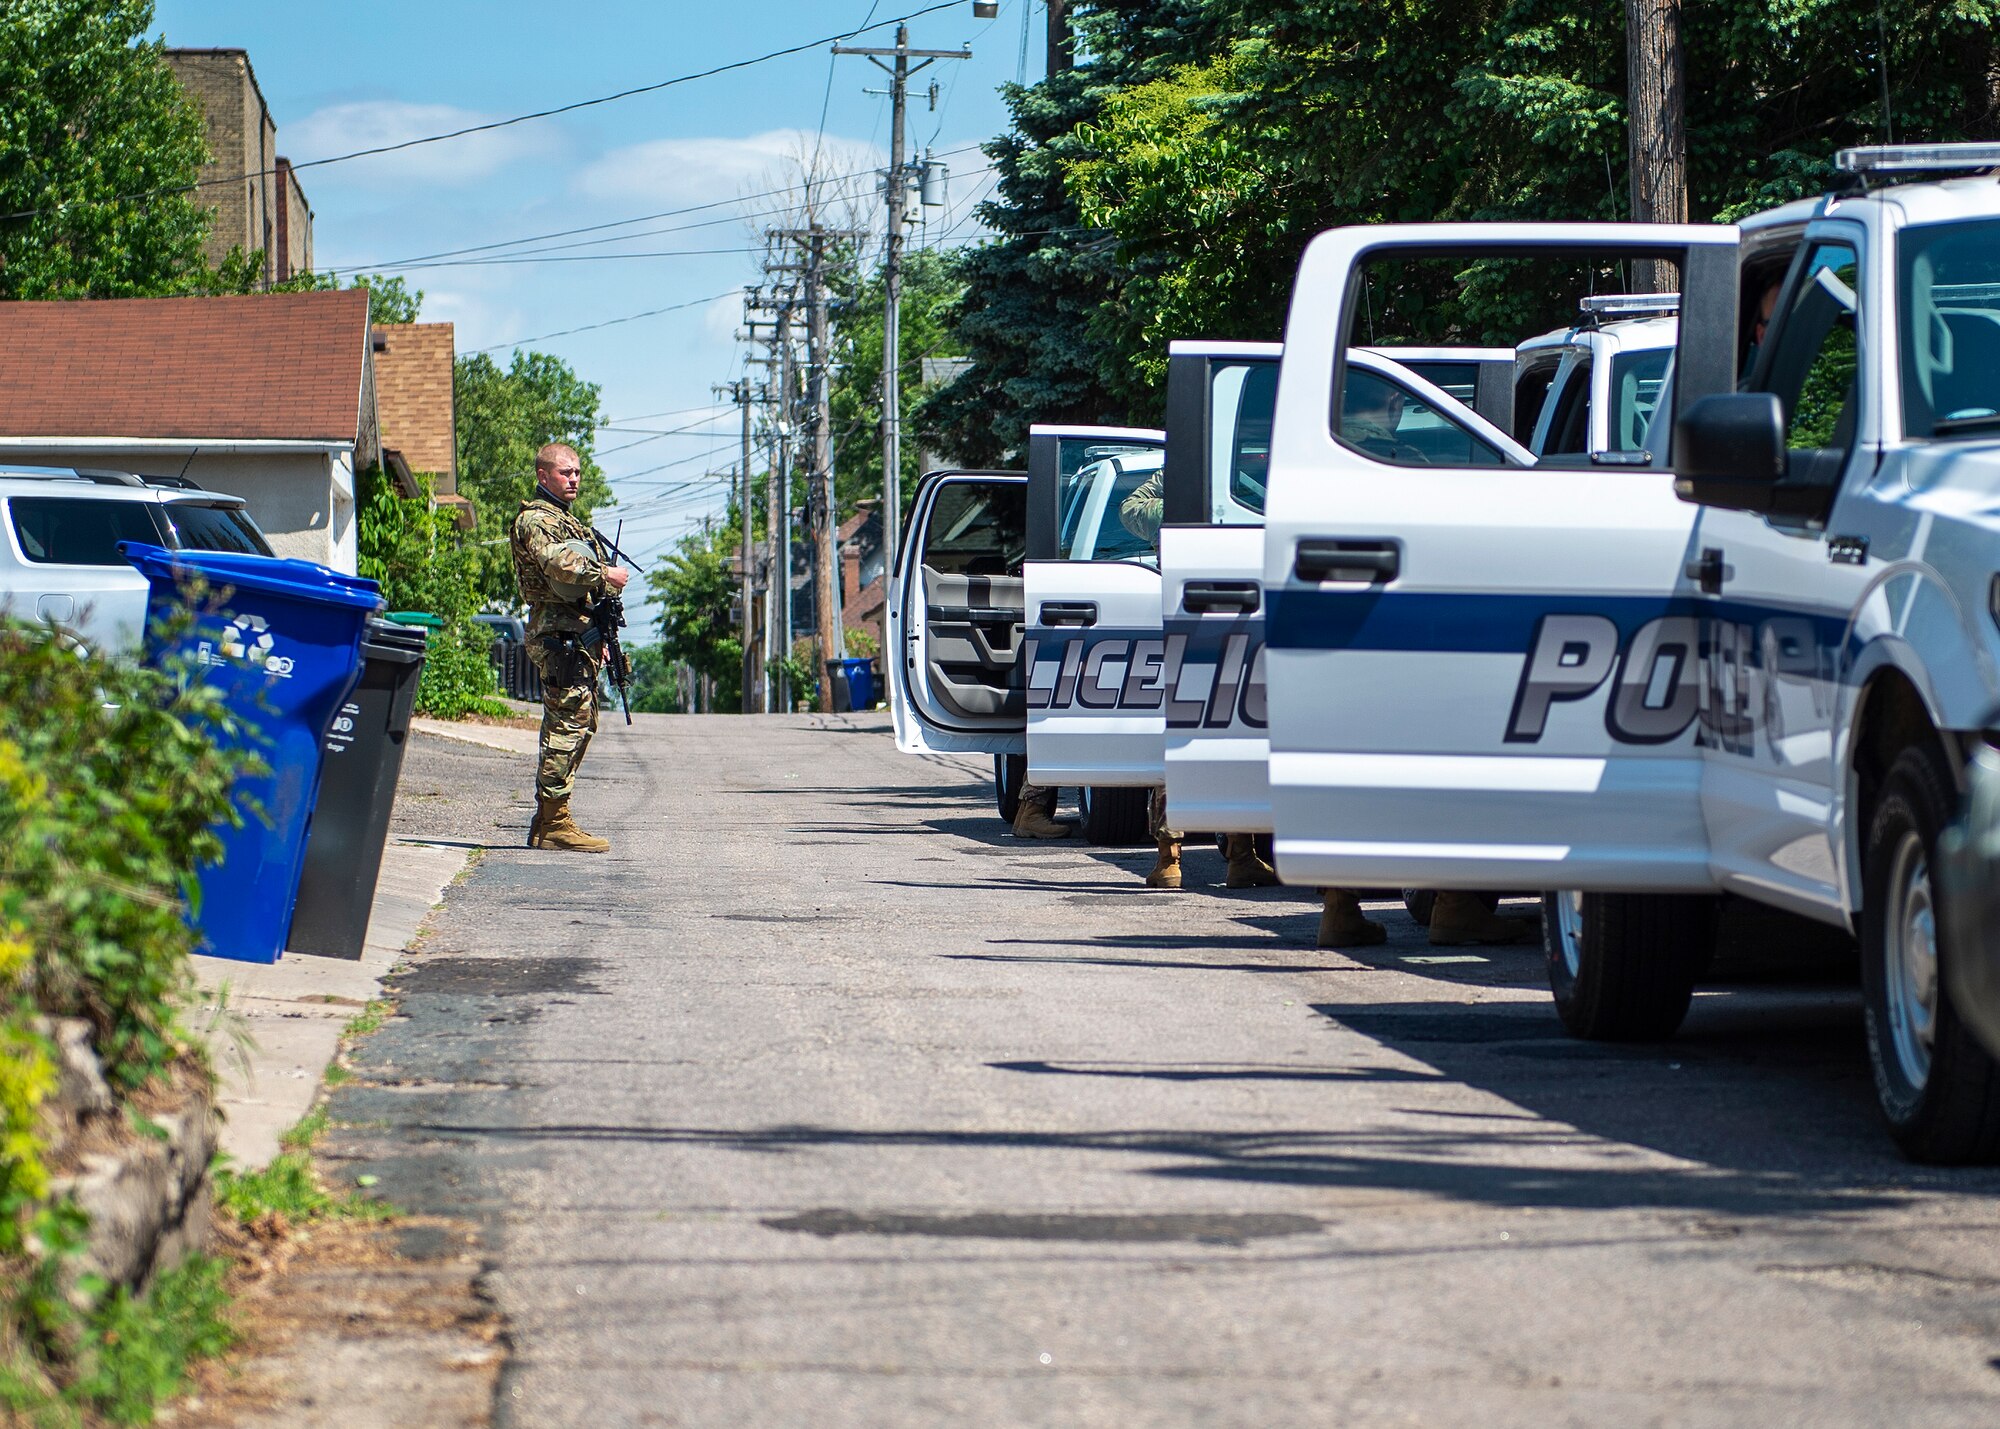 U.S. Air Force Airmen from the 133rd Security Forces Squadron prepare to connect with local law enforcement to assist in their policing efforts in St. Paul, Minn., June 1, 2020.